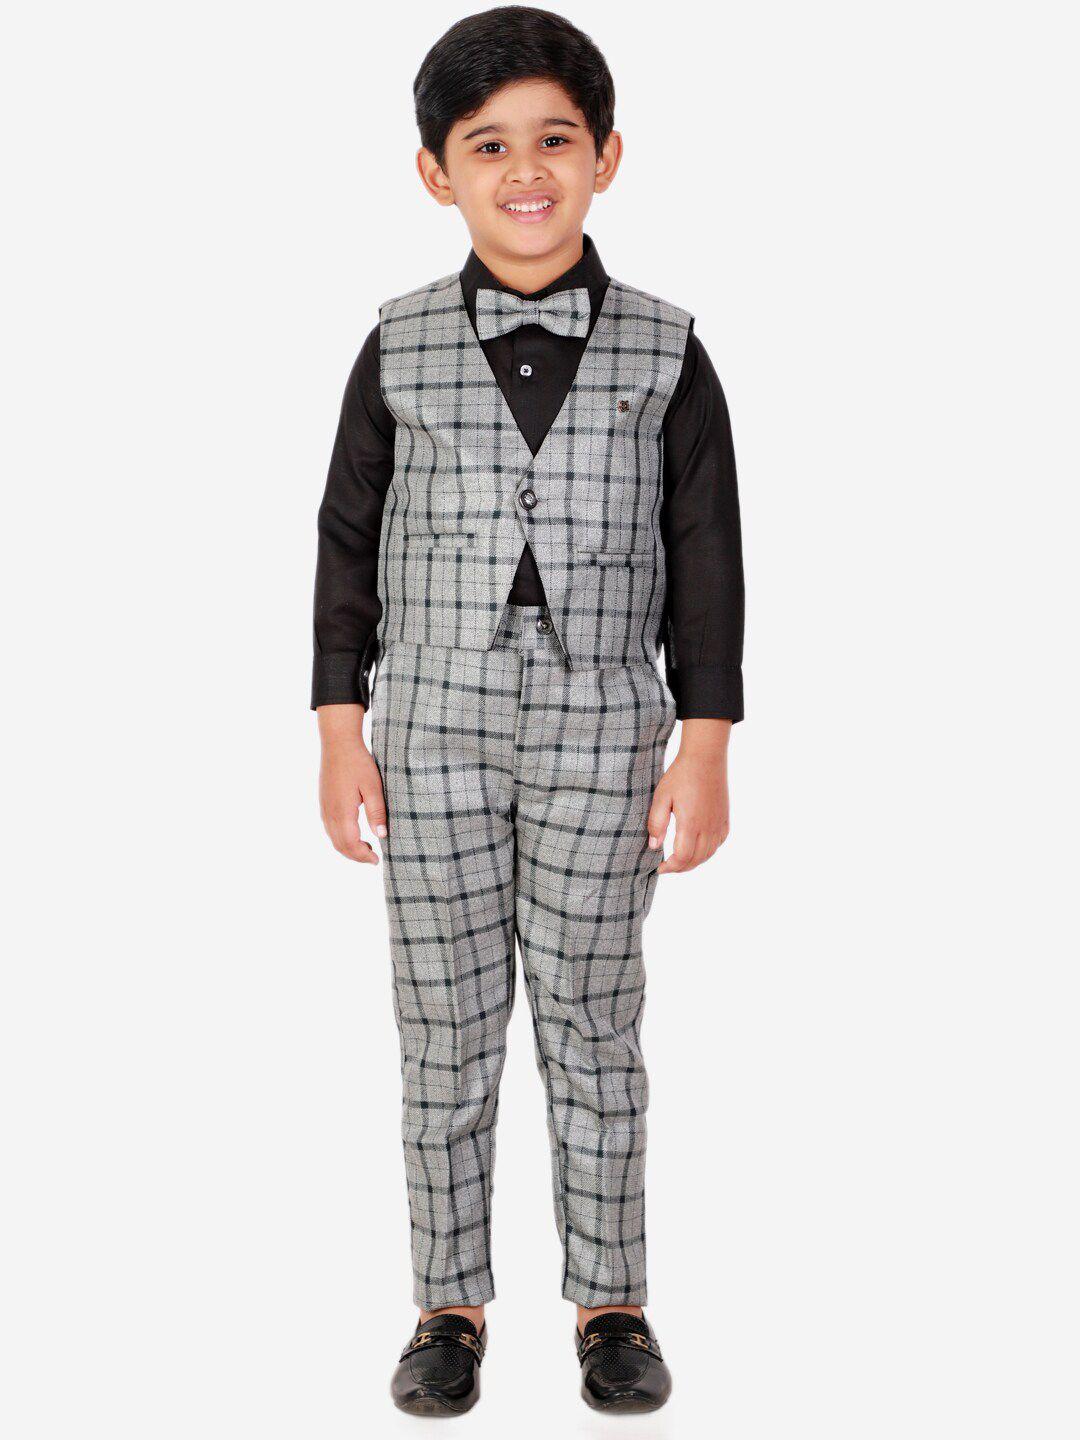 pro-ethic style developer boys grey & black checked pure cotton shirt with trousers